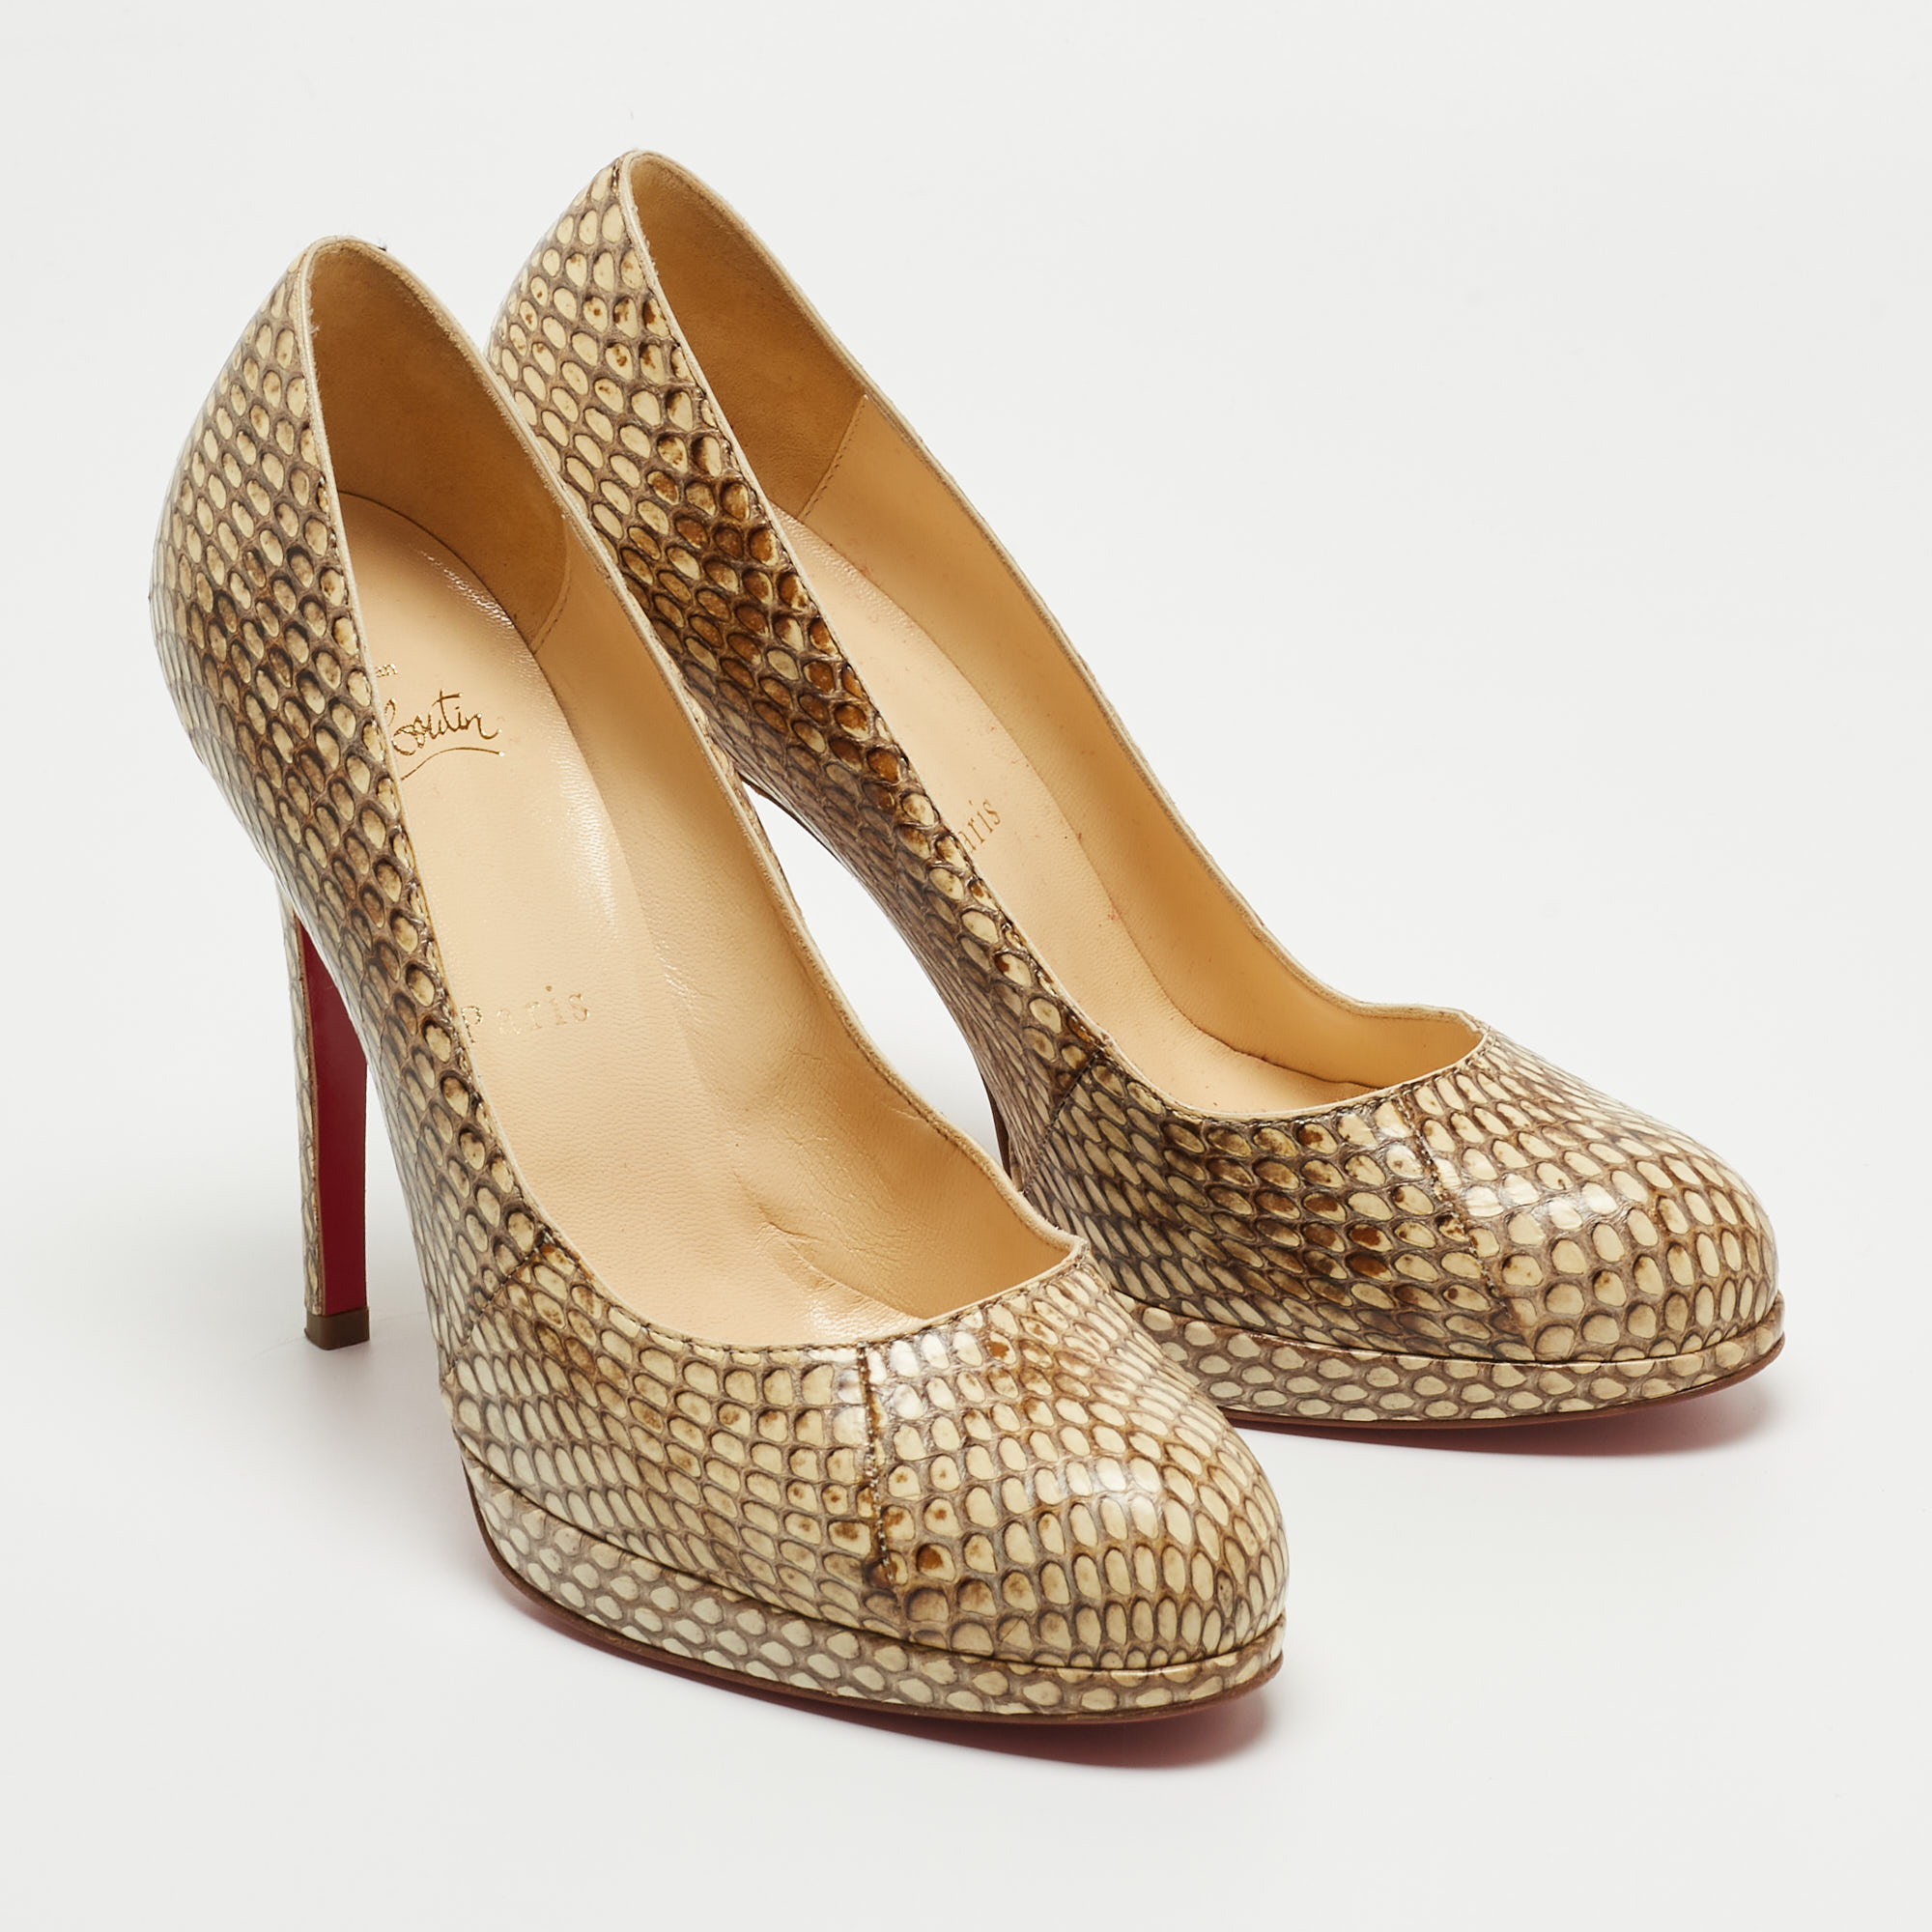 Christian Louboutin Beige Python Leather New Simple Round Toe Pumps Size 36.5